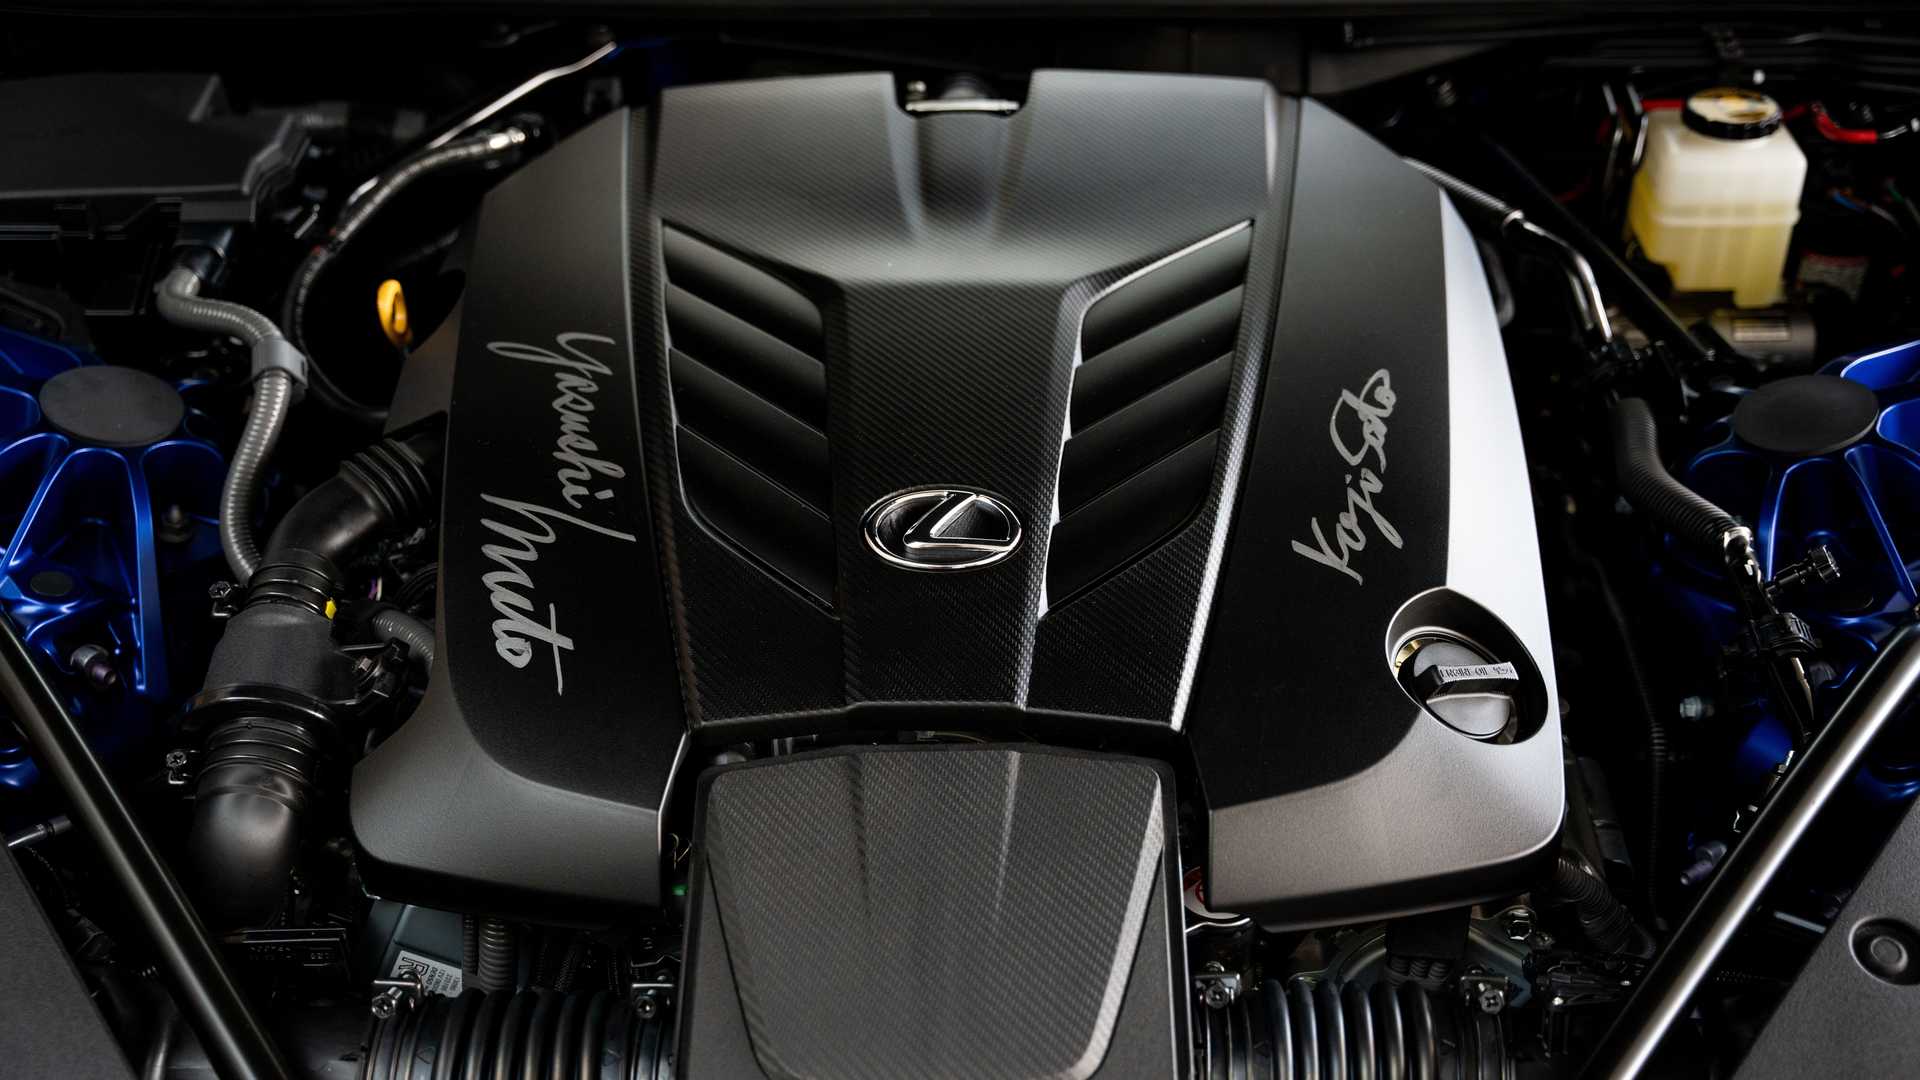 lexus-lc-500-convertible-charity-delivery-engine-signed.jpg